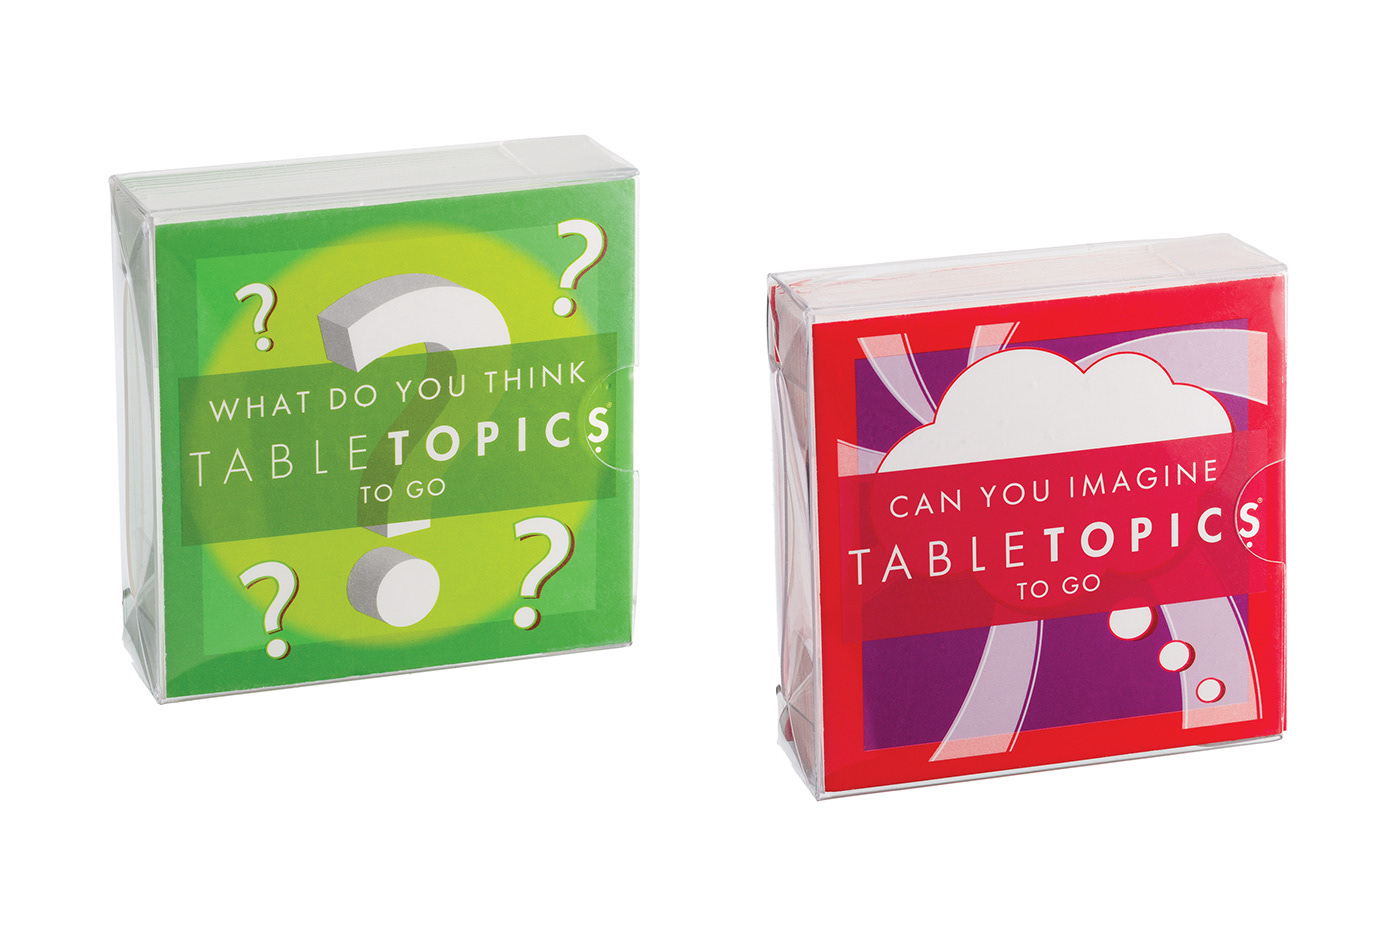 TableTopics kids question cards